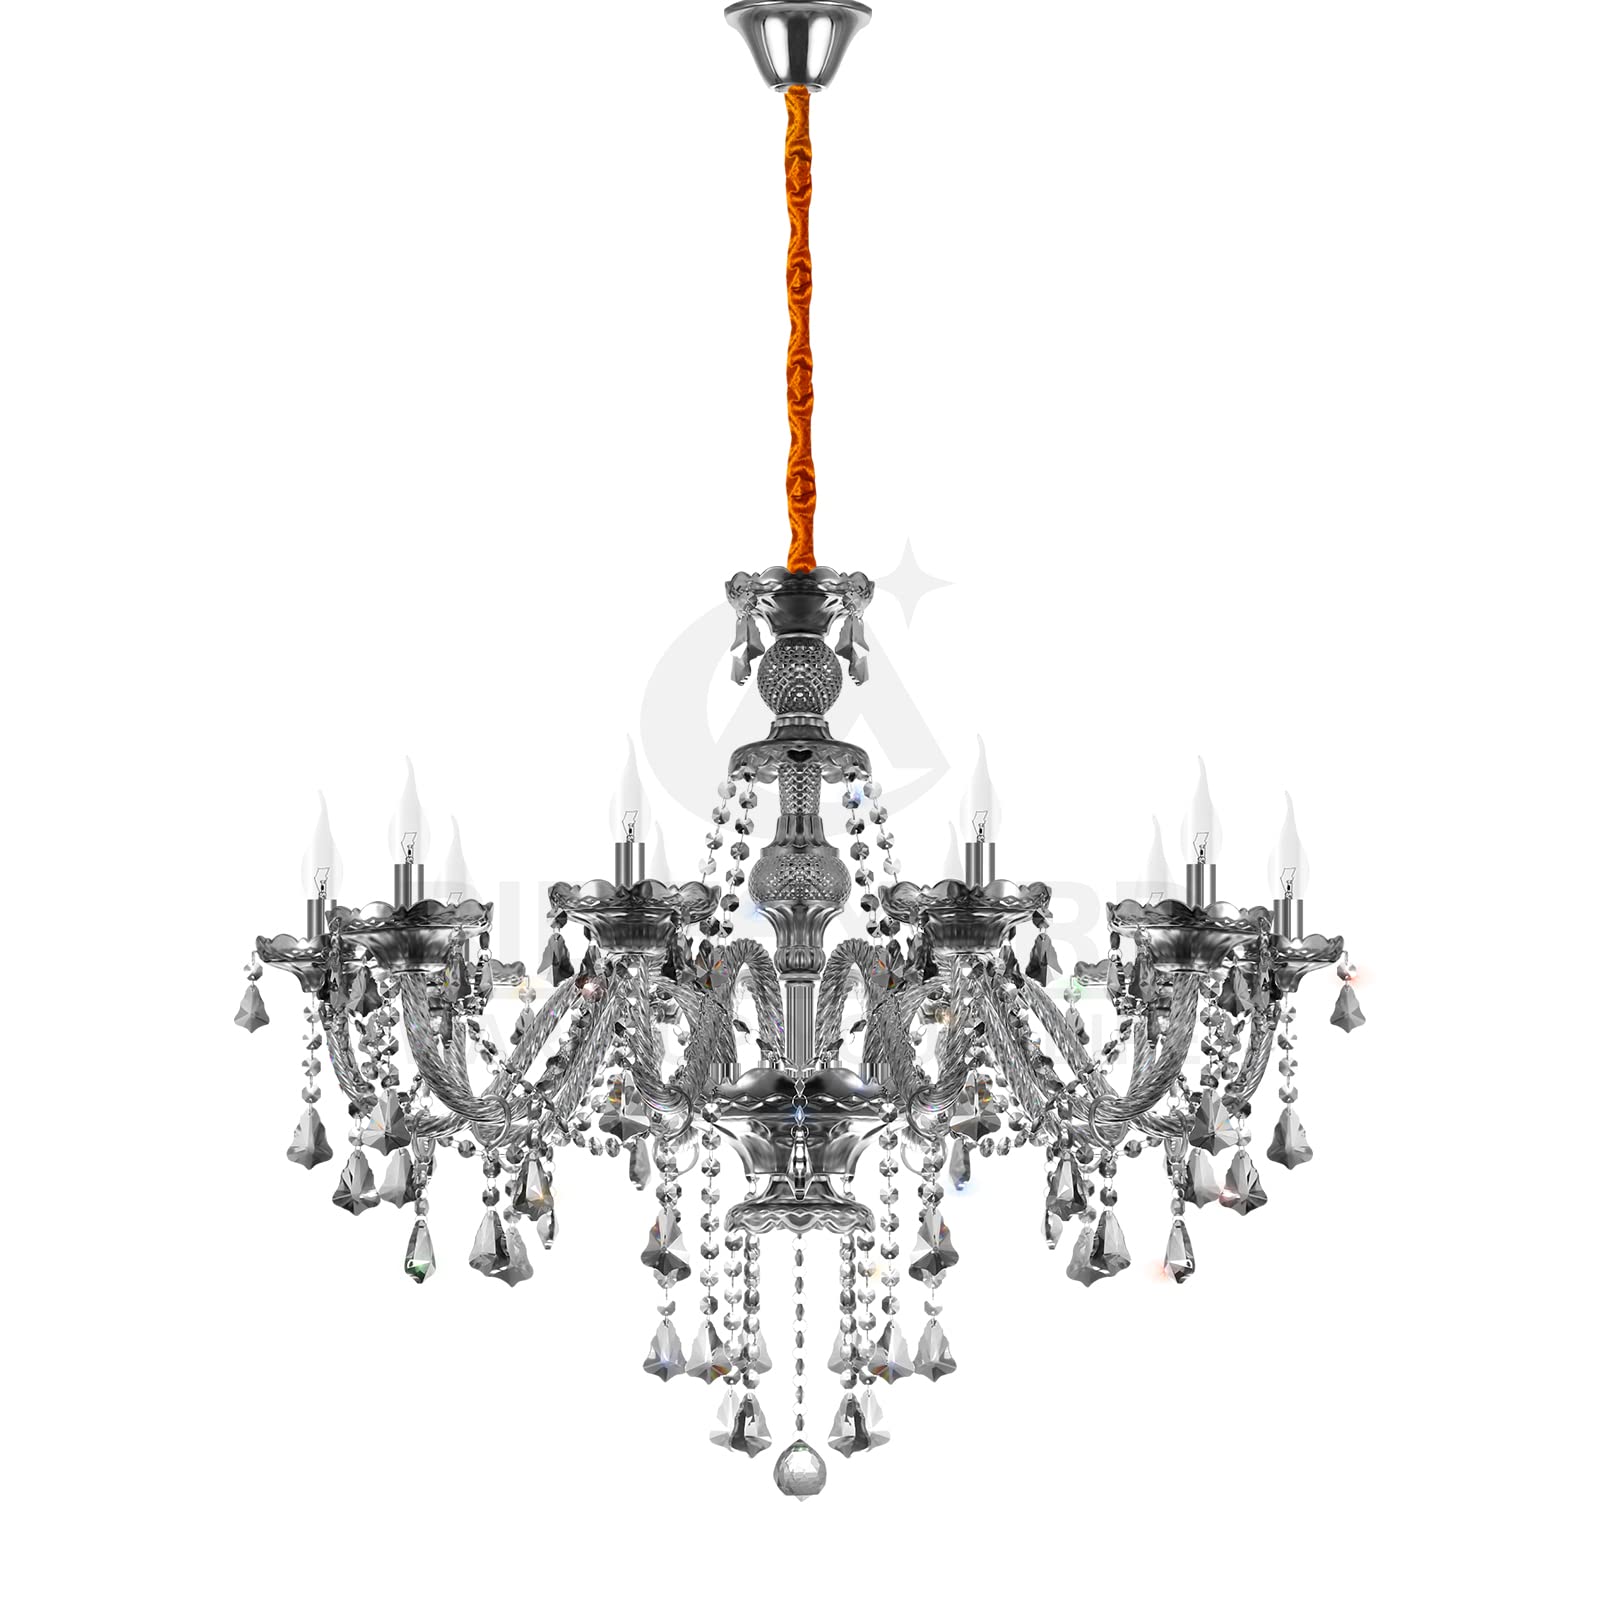 Ridgeyard 10 Lights Crystal Chandelier Candle Style Ceiling Pendant Luxury Light Fixture for Living Room Dining Room Bedroom Hall Balcony, Grey